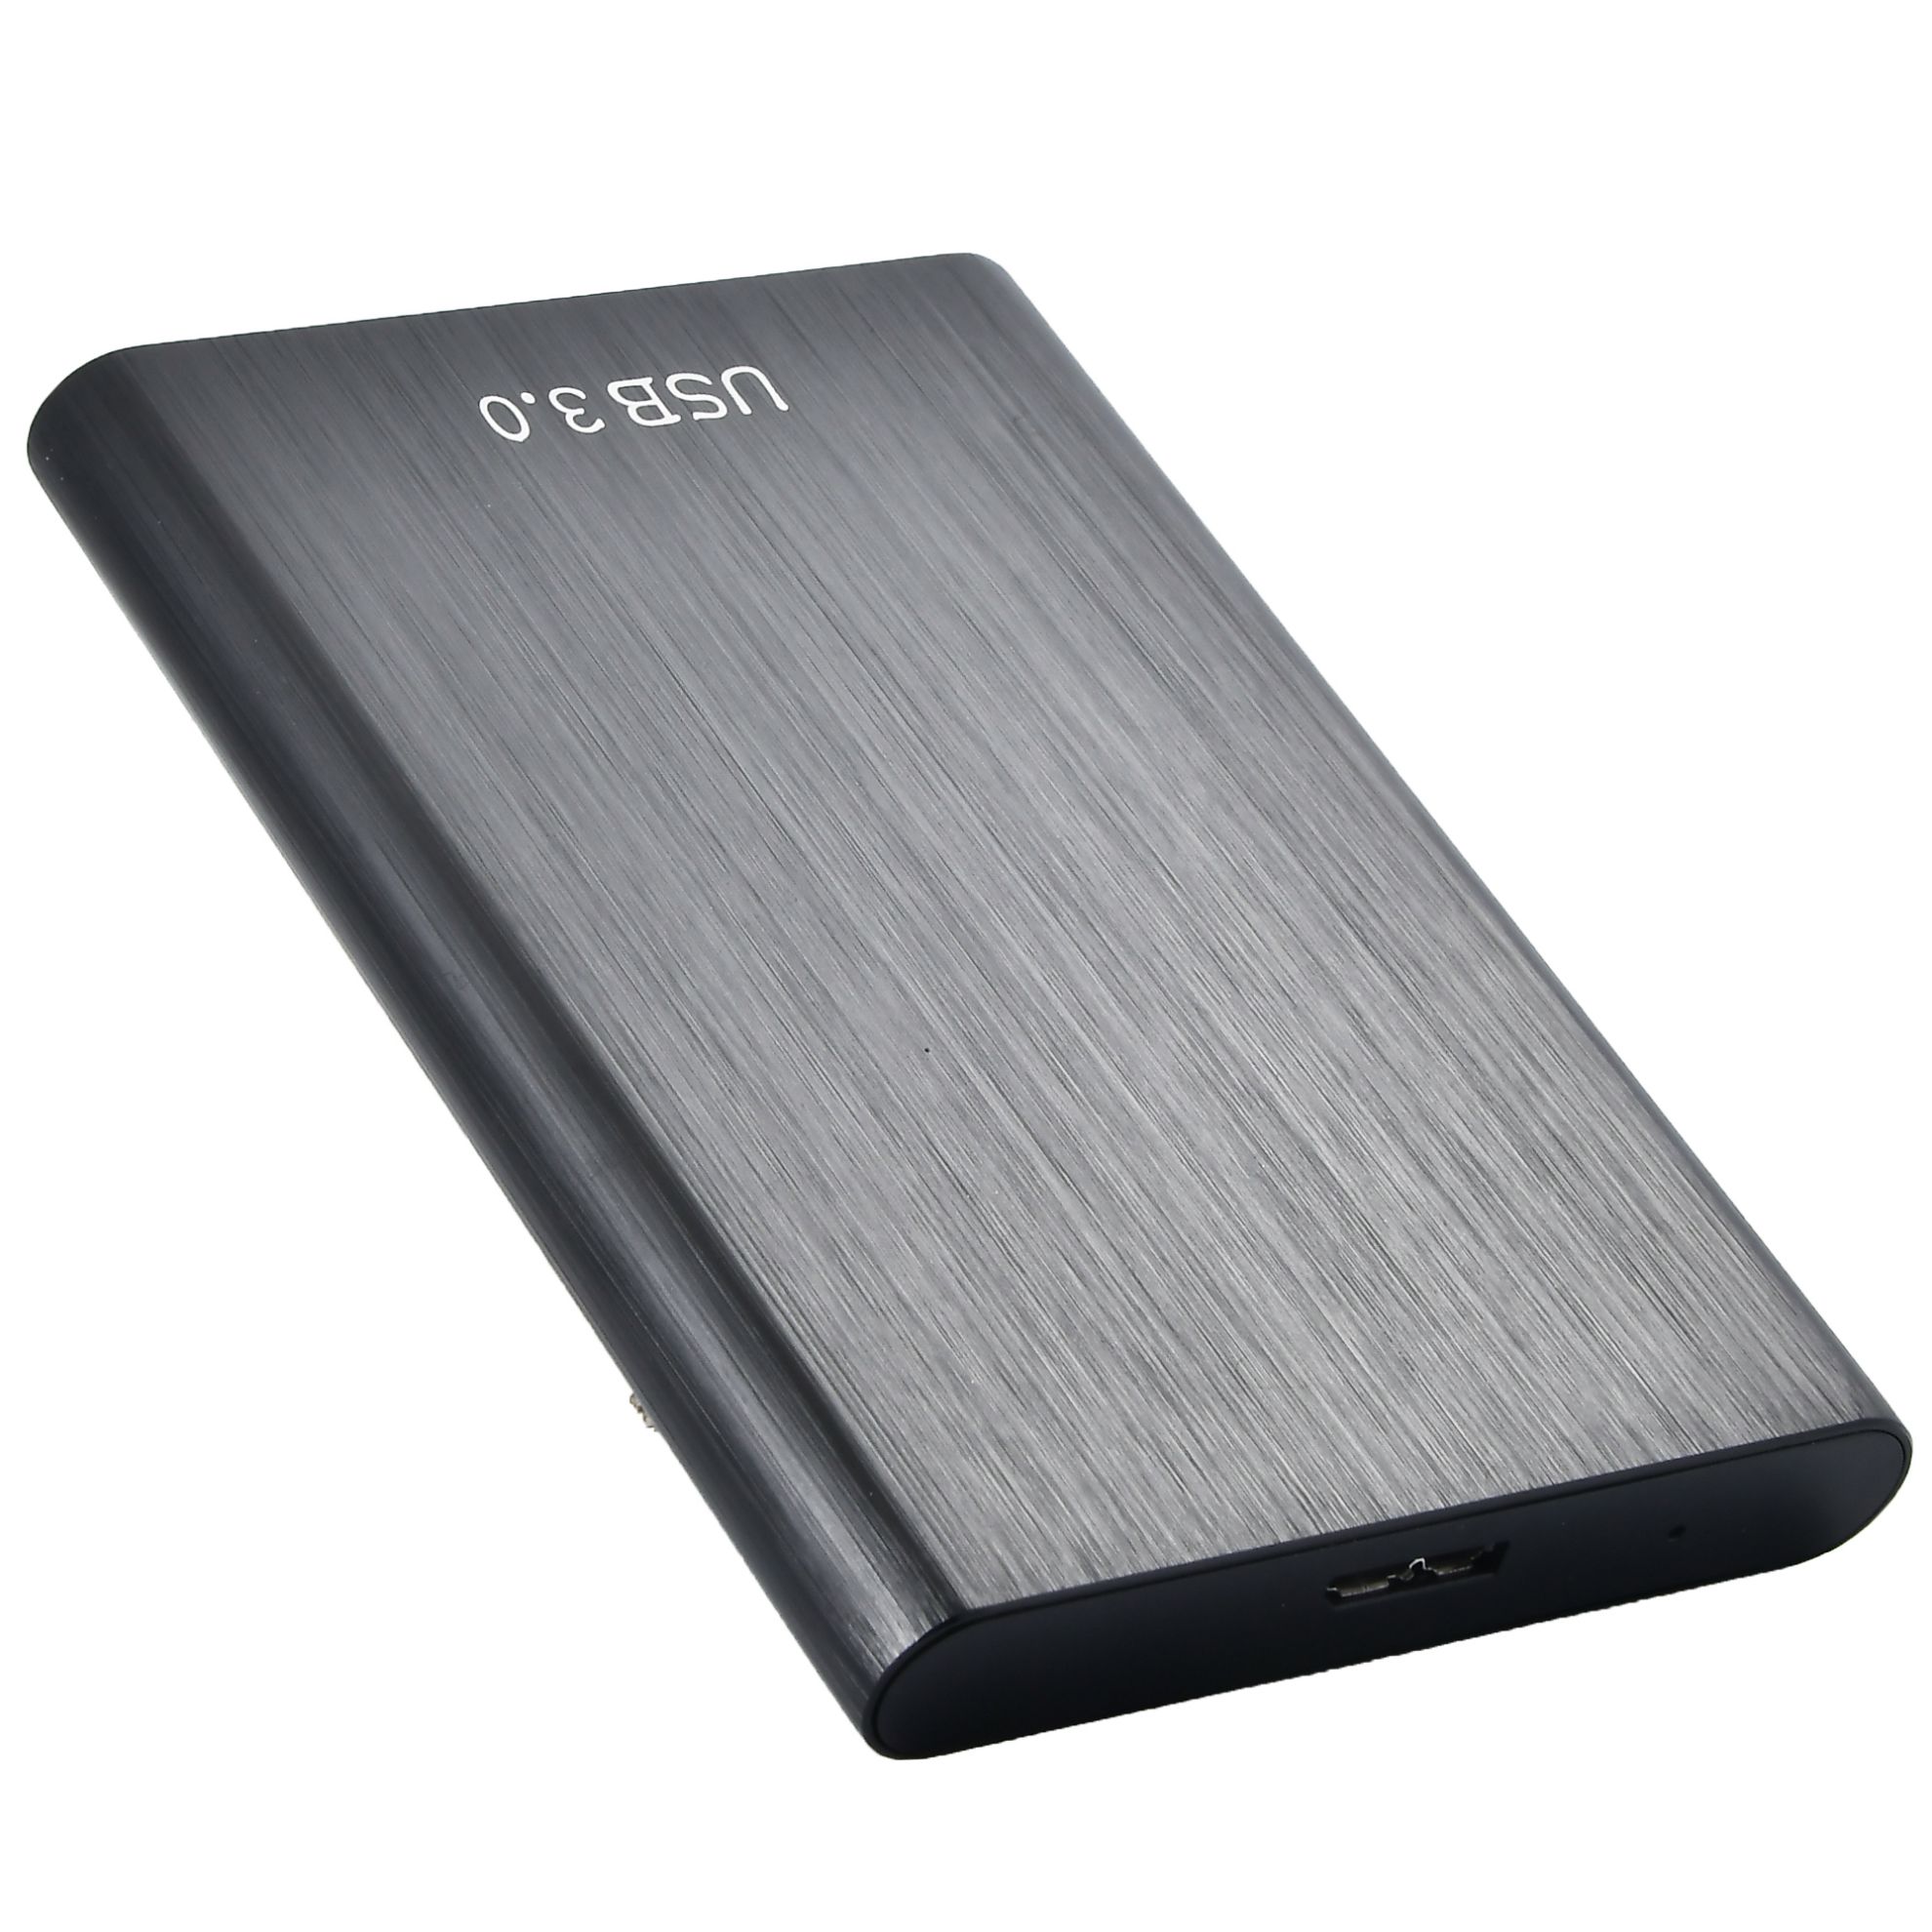 2TB External Hard Drive Portable Hard Drive External HHD High Speed USB 3.1 Compatible with PC, Laptop and Mac